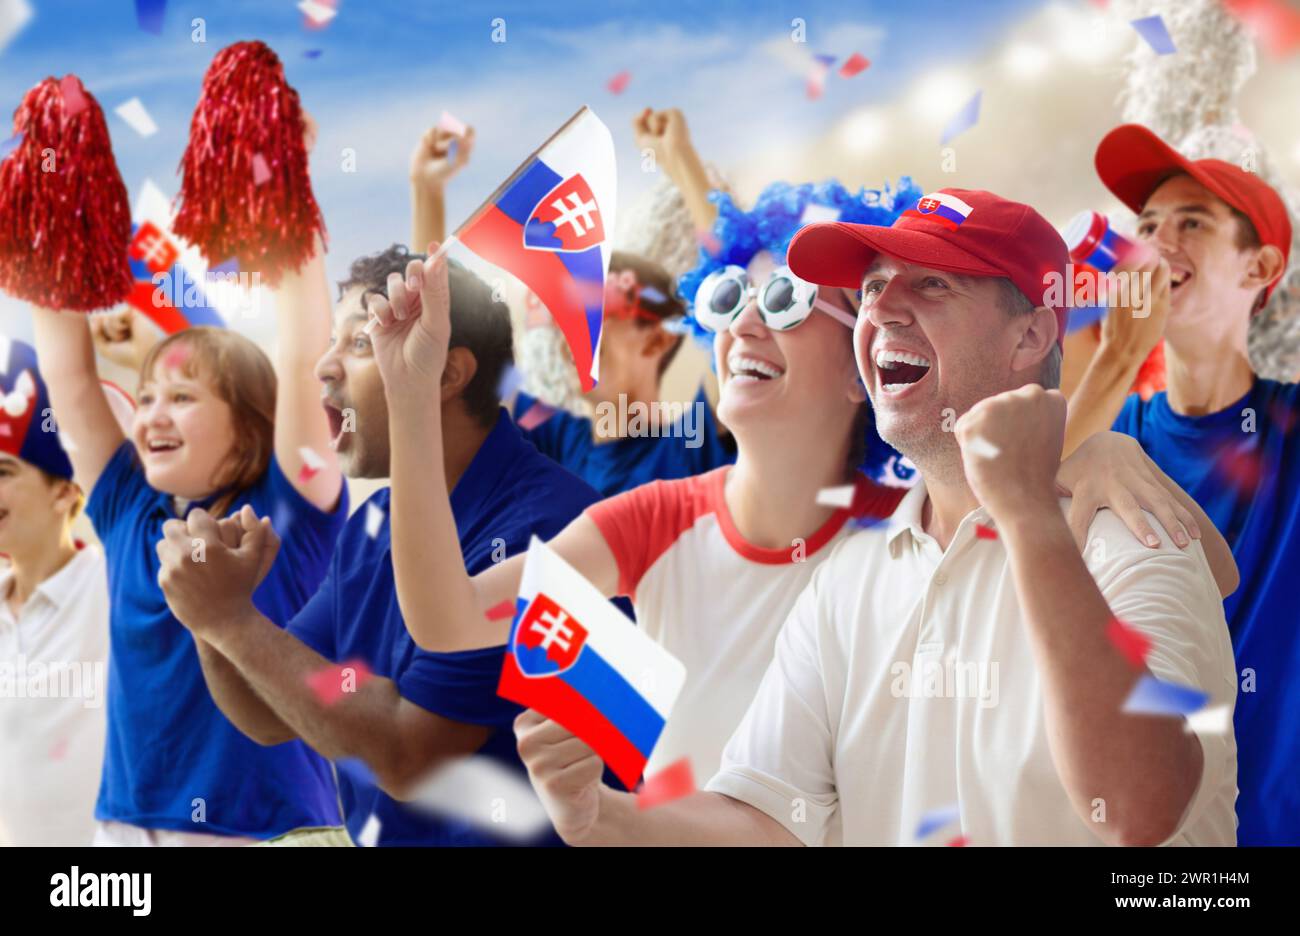 Slovakia football supporter on stadium. Slovak fans on soccer pitch watching team play. Group of supporters with flag and national jersey cheering Stock Photo